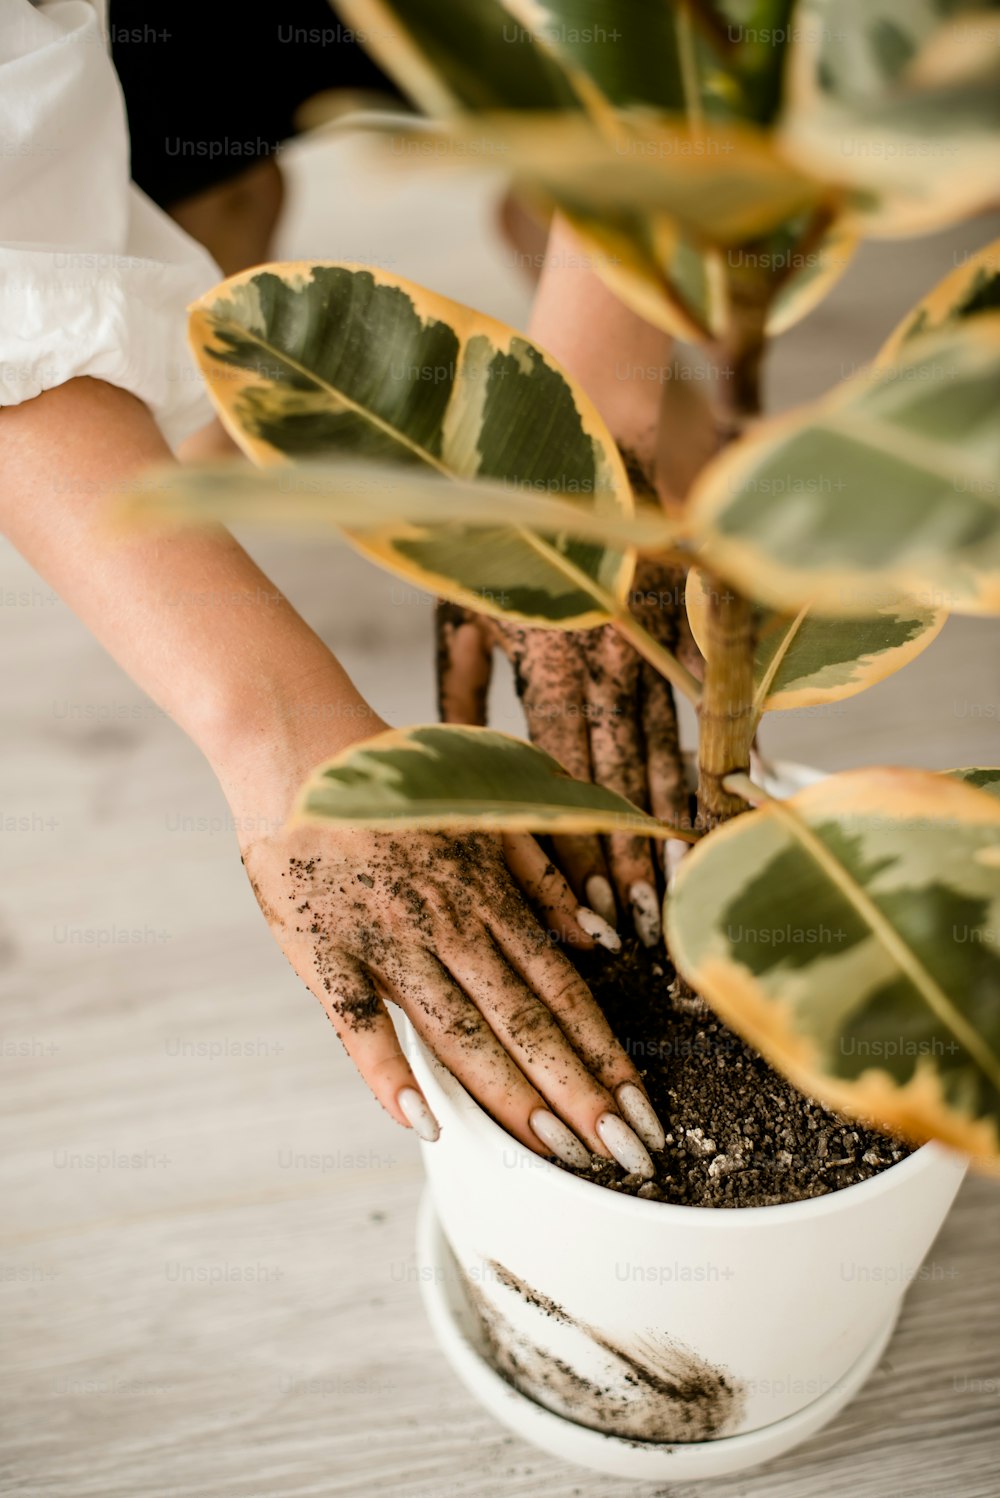 a person holding a potted plant with dirt on it